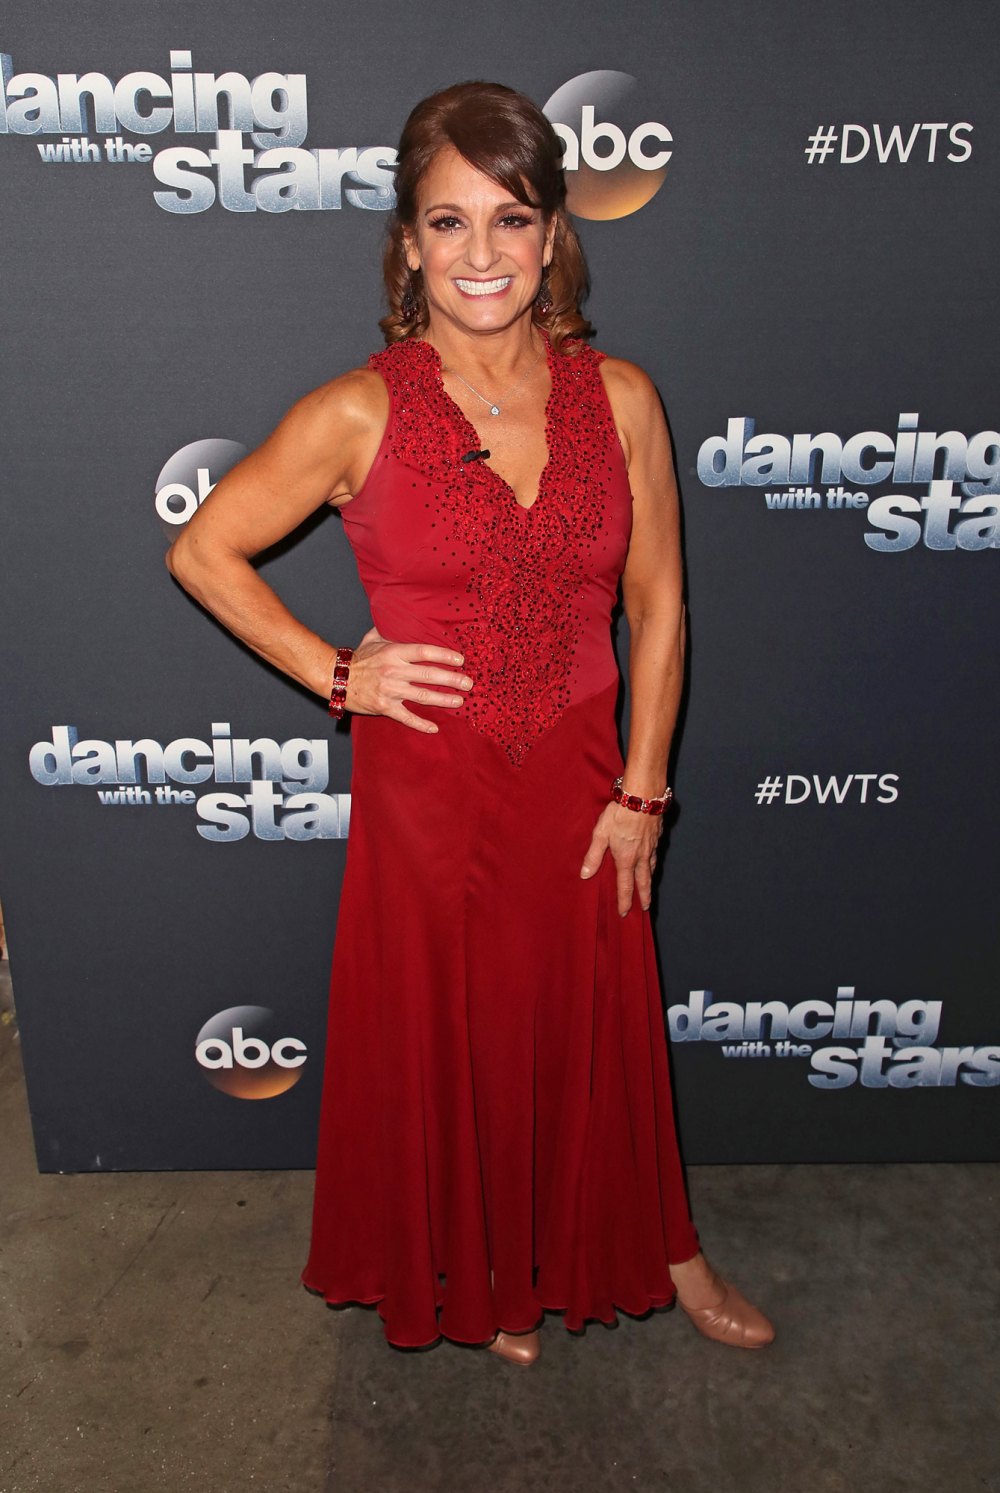 Mary Lou Retton Daughter Shares Update on Her Condition